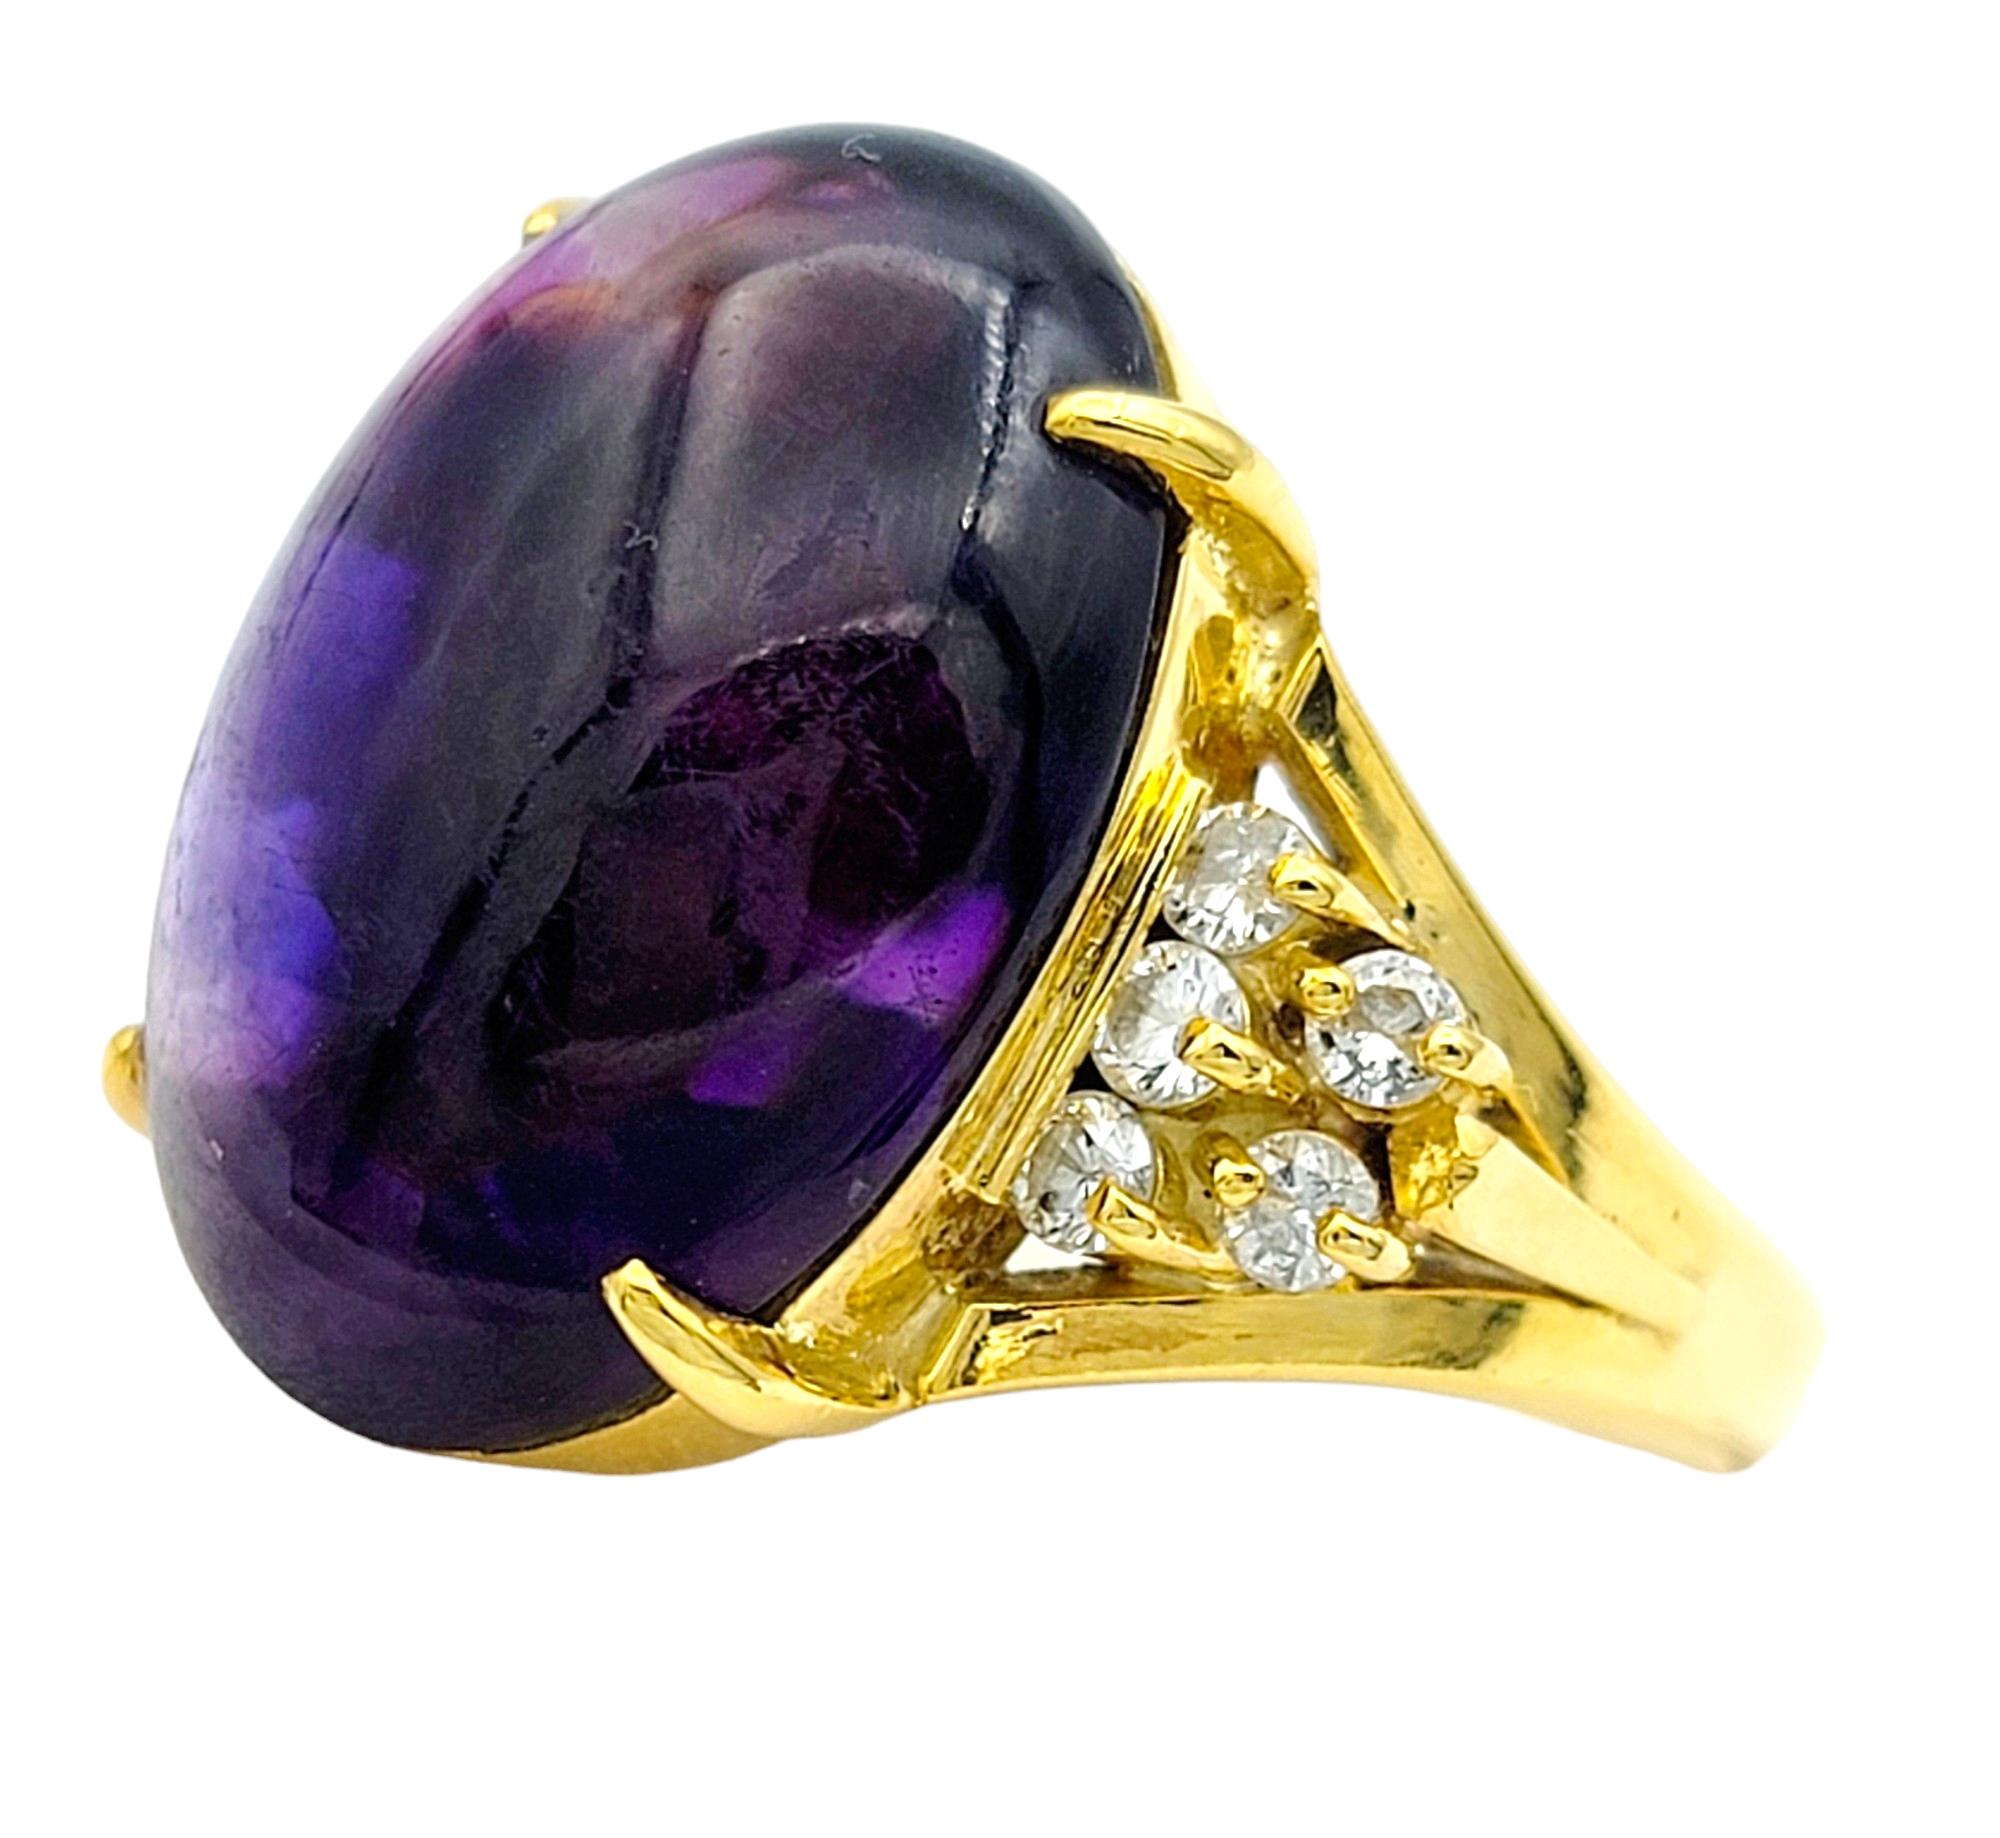 Oval Cabochon Amethyst and Diamond Cocktail Ring Set in 18 Karat Yellow Gold In Good Condition For Sale In Scottsdale, AZ